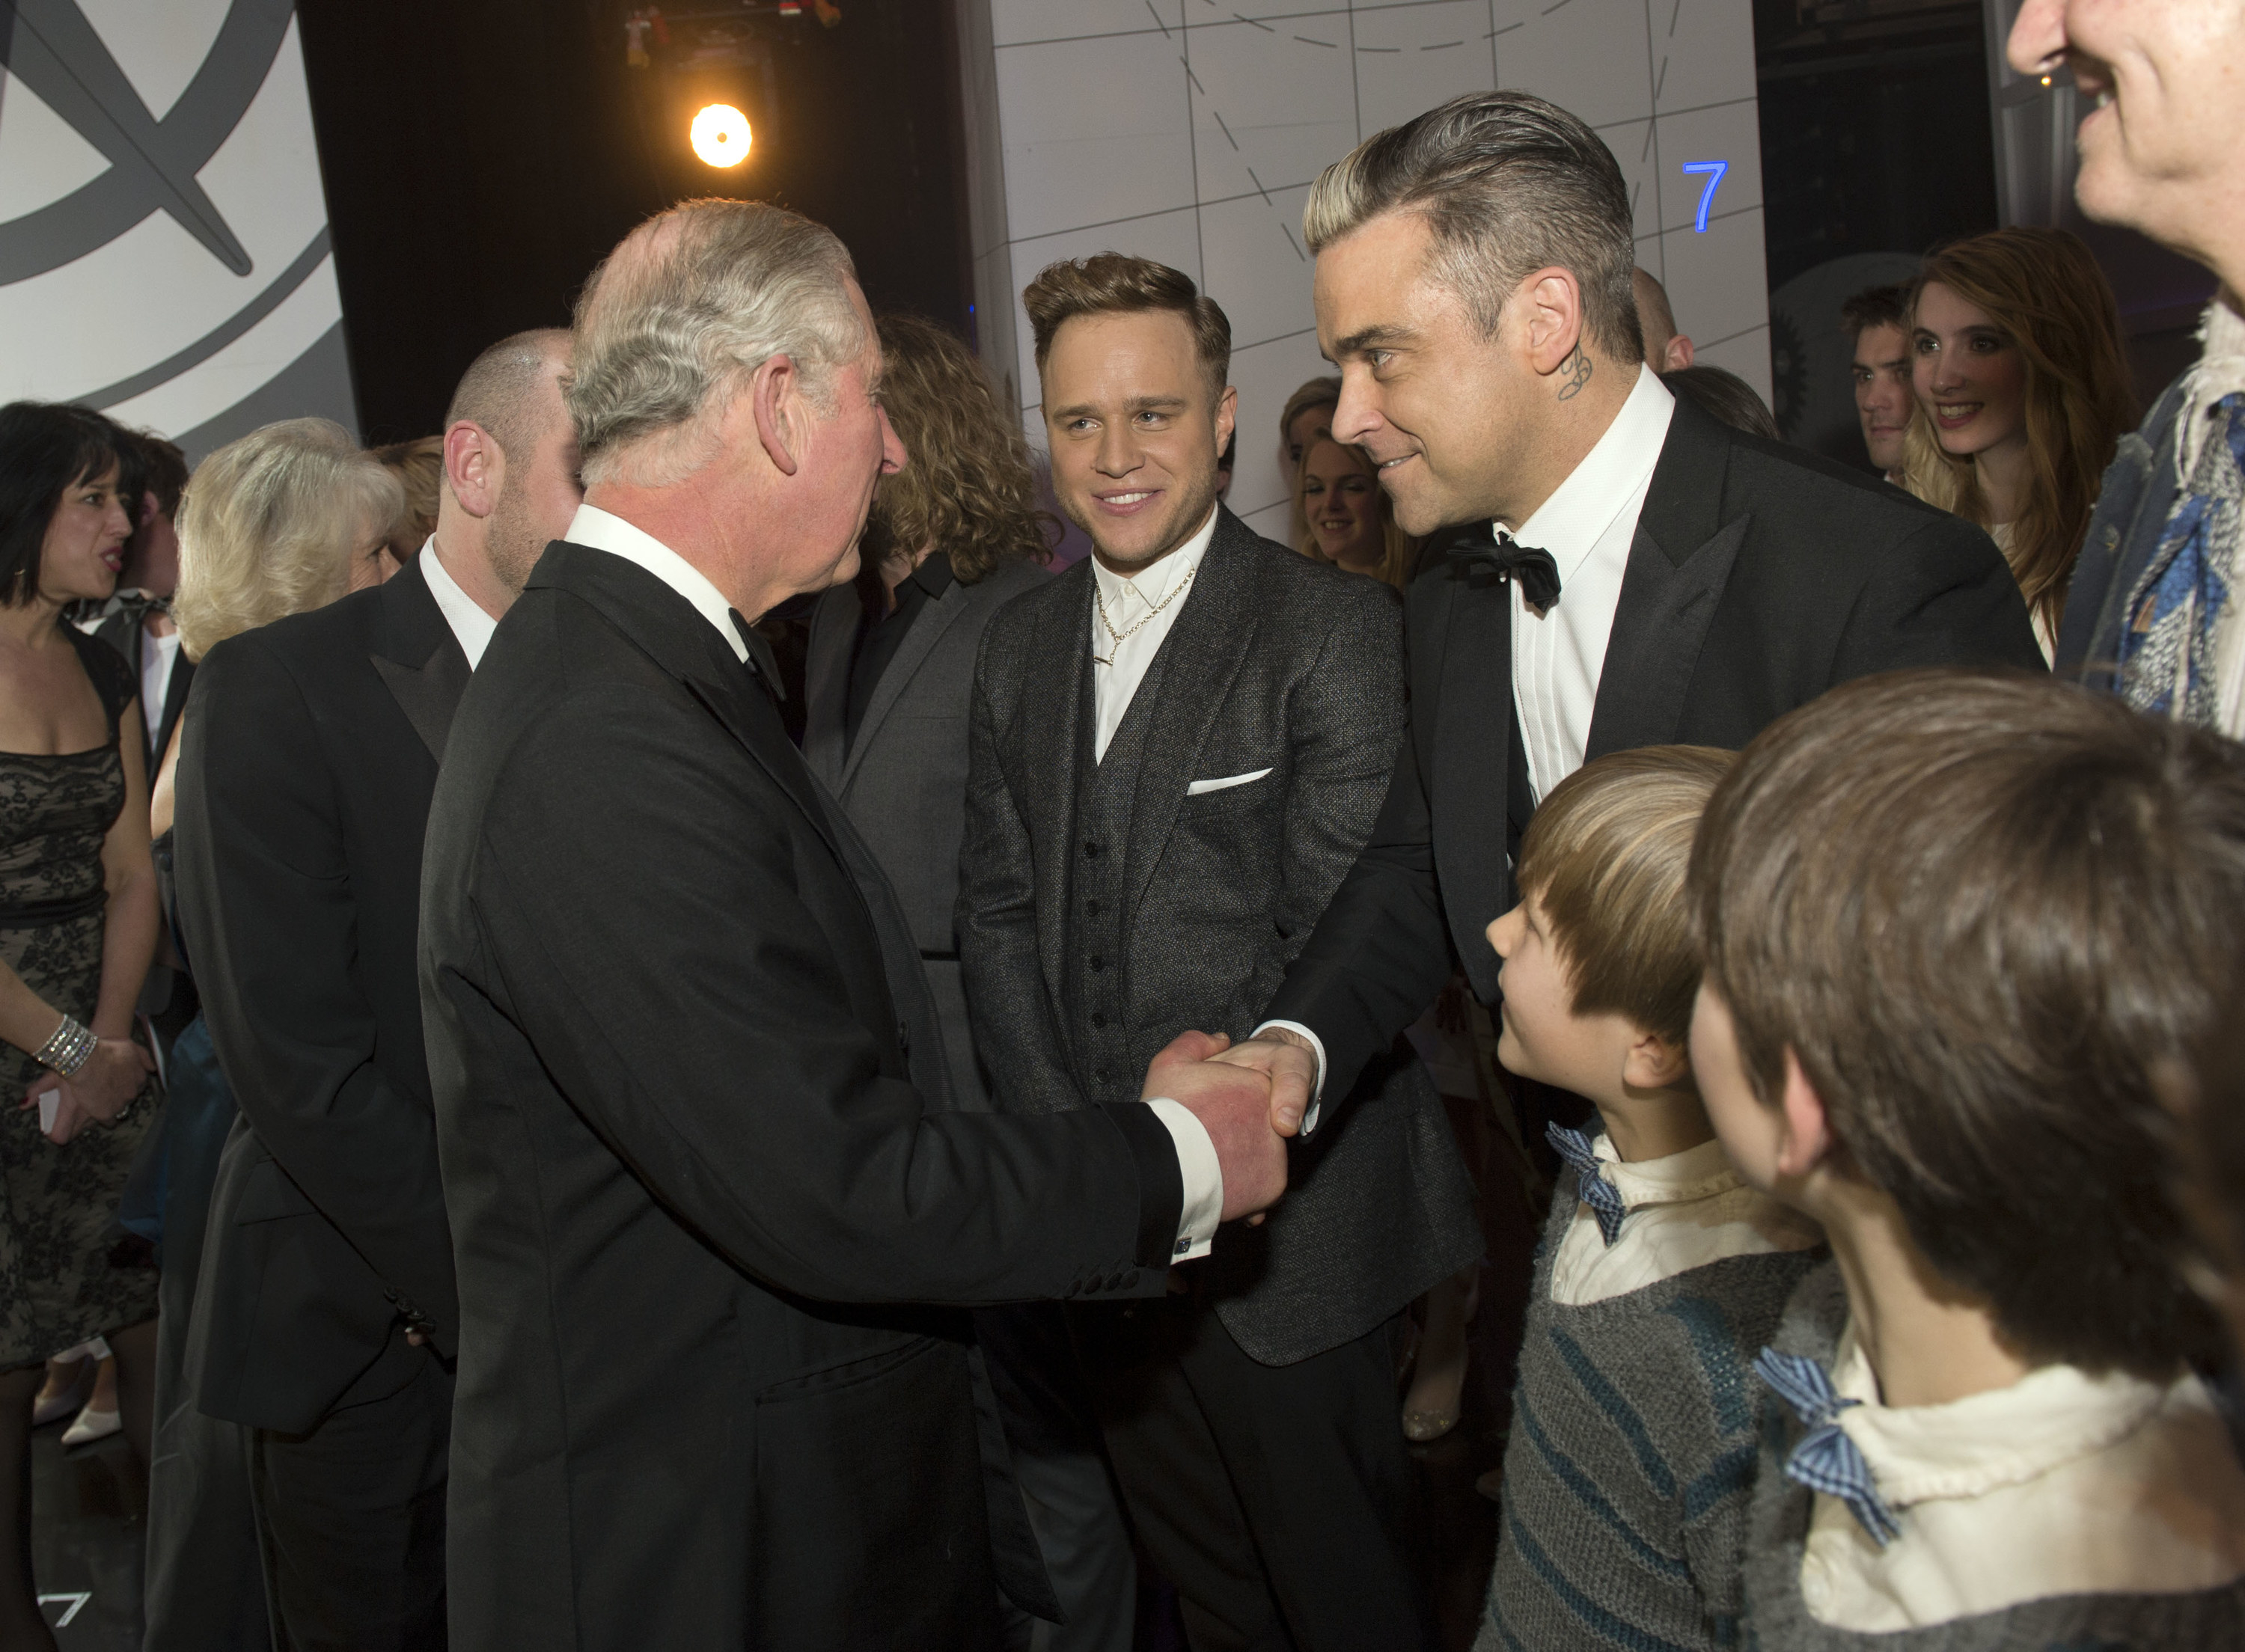 Charles and Robbie shaking hands